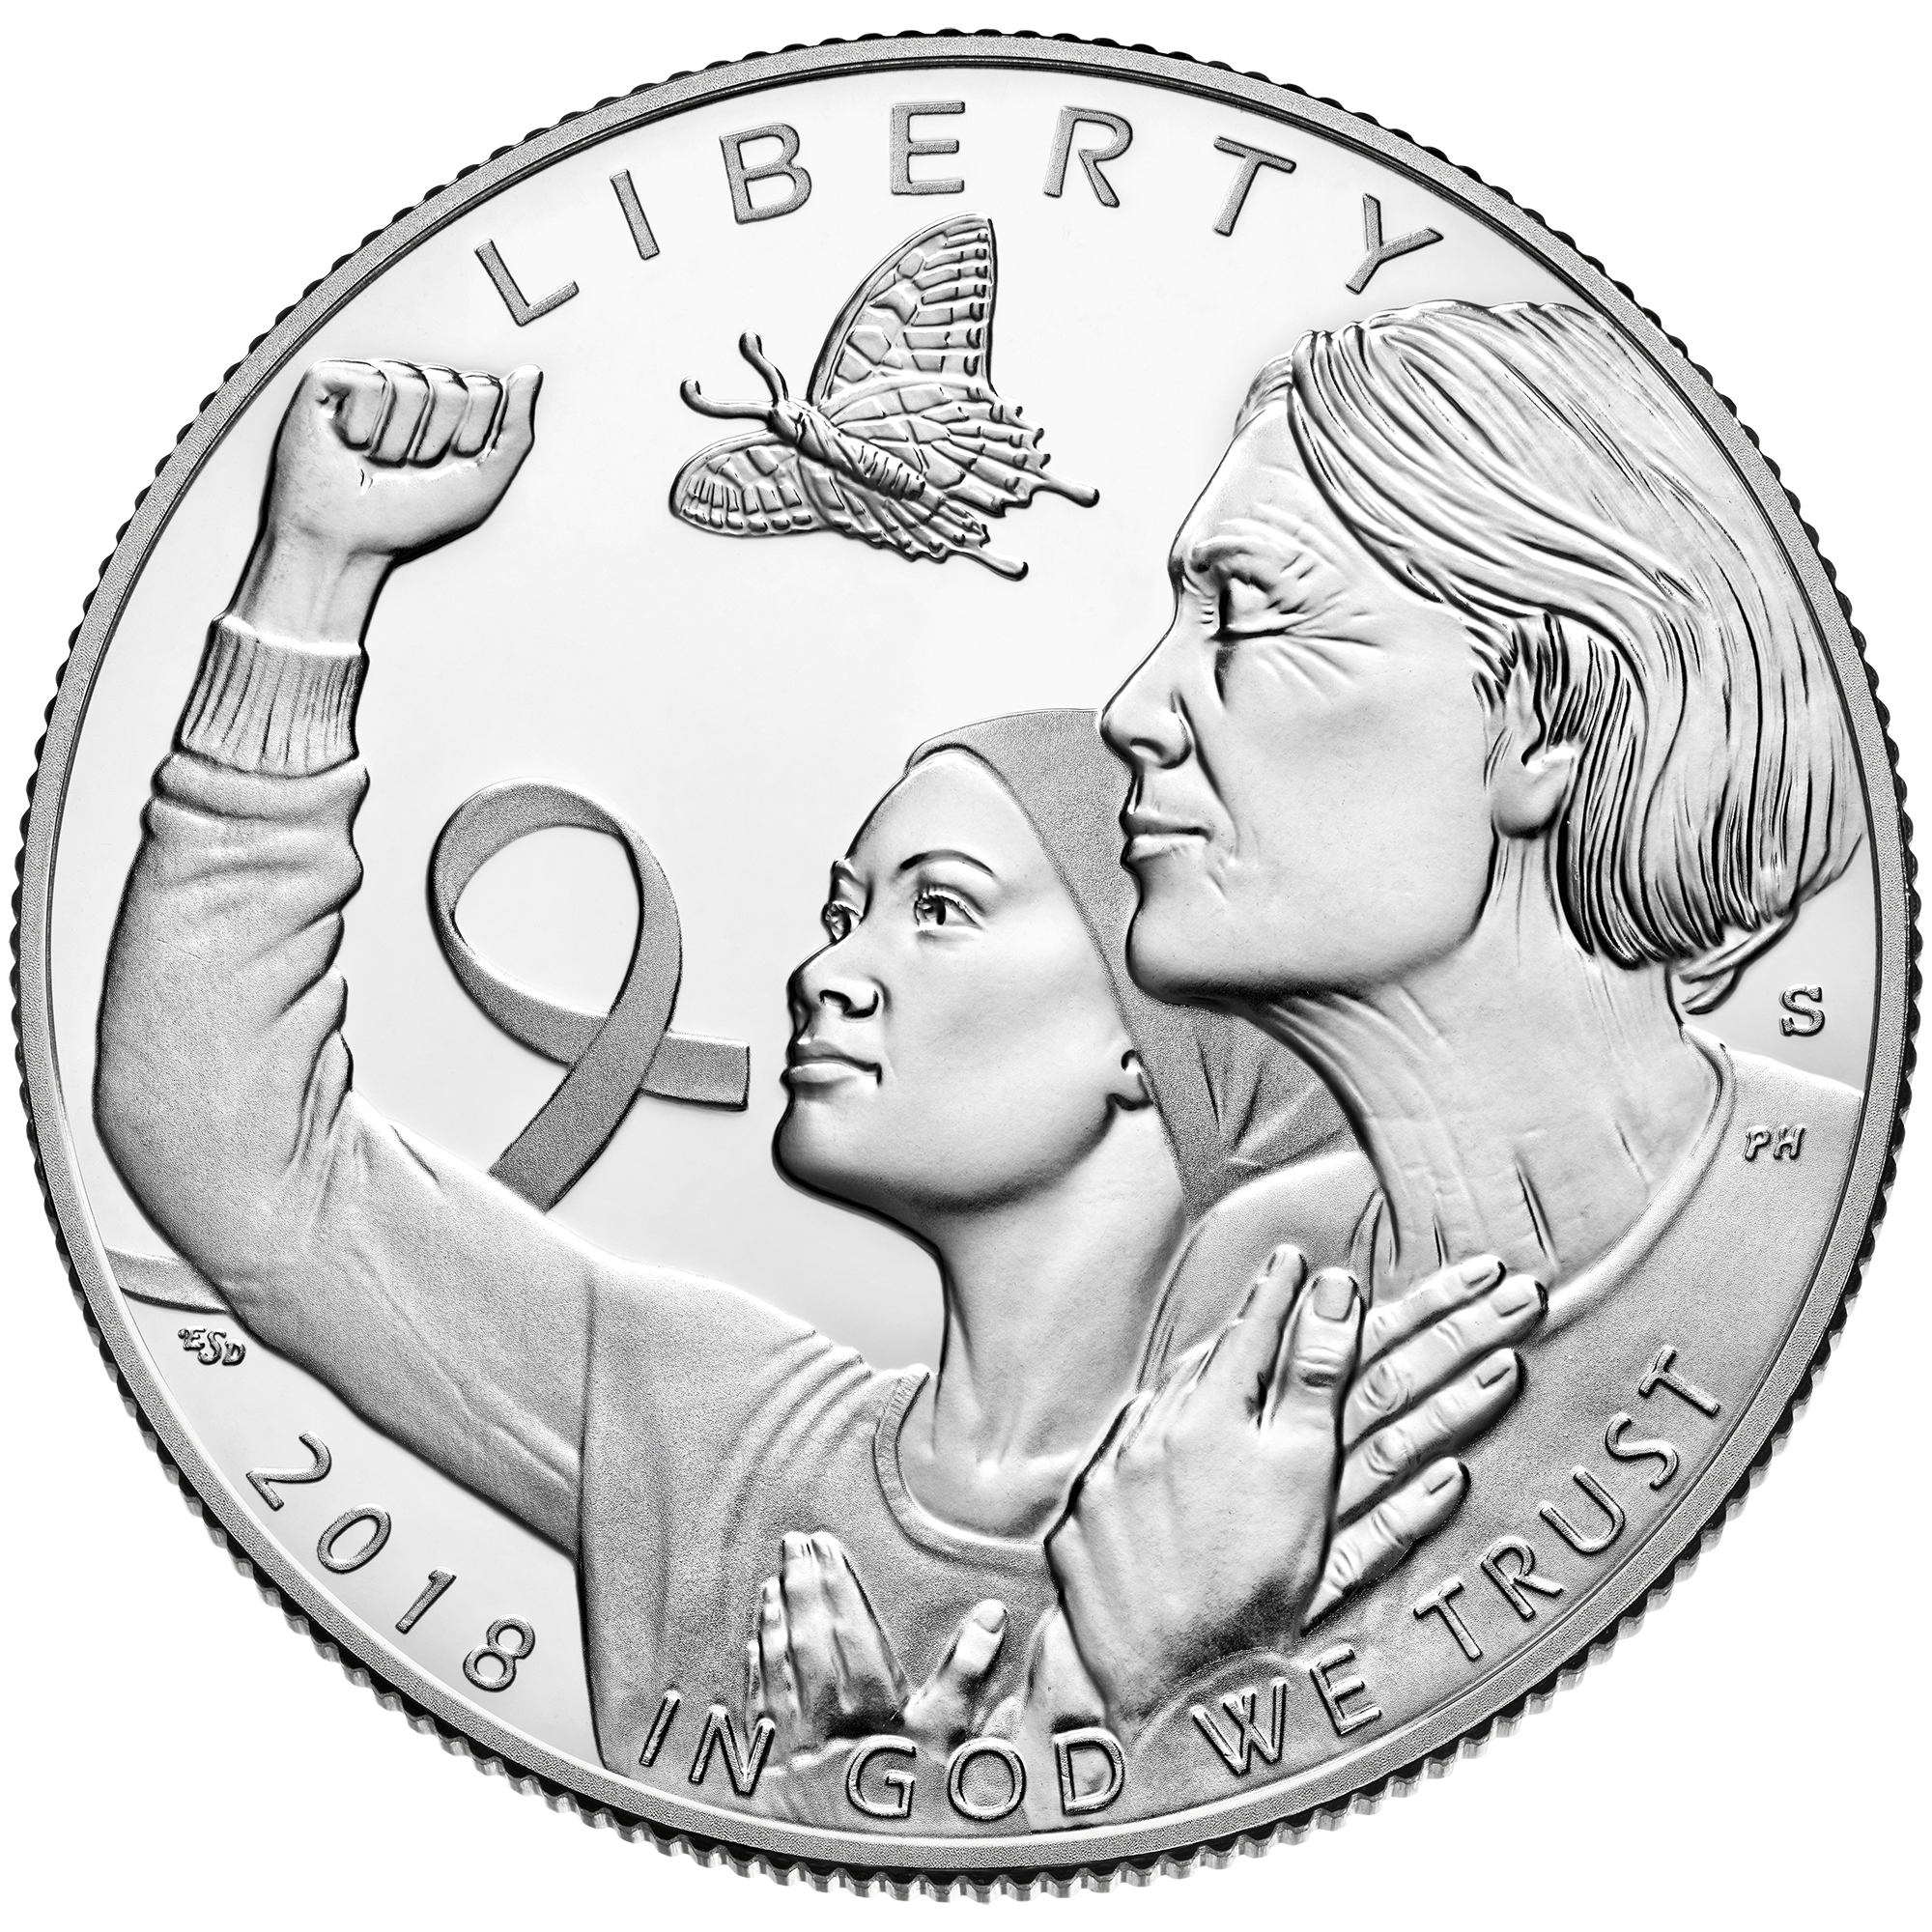 2018 Breast Cancer Awareness Commemorative Clad Proof Coin Obverse